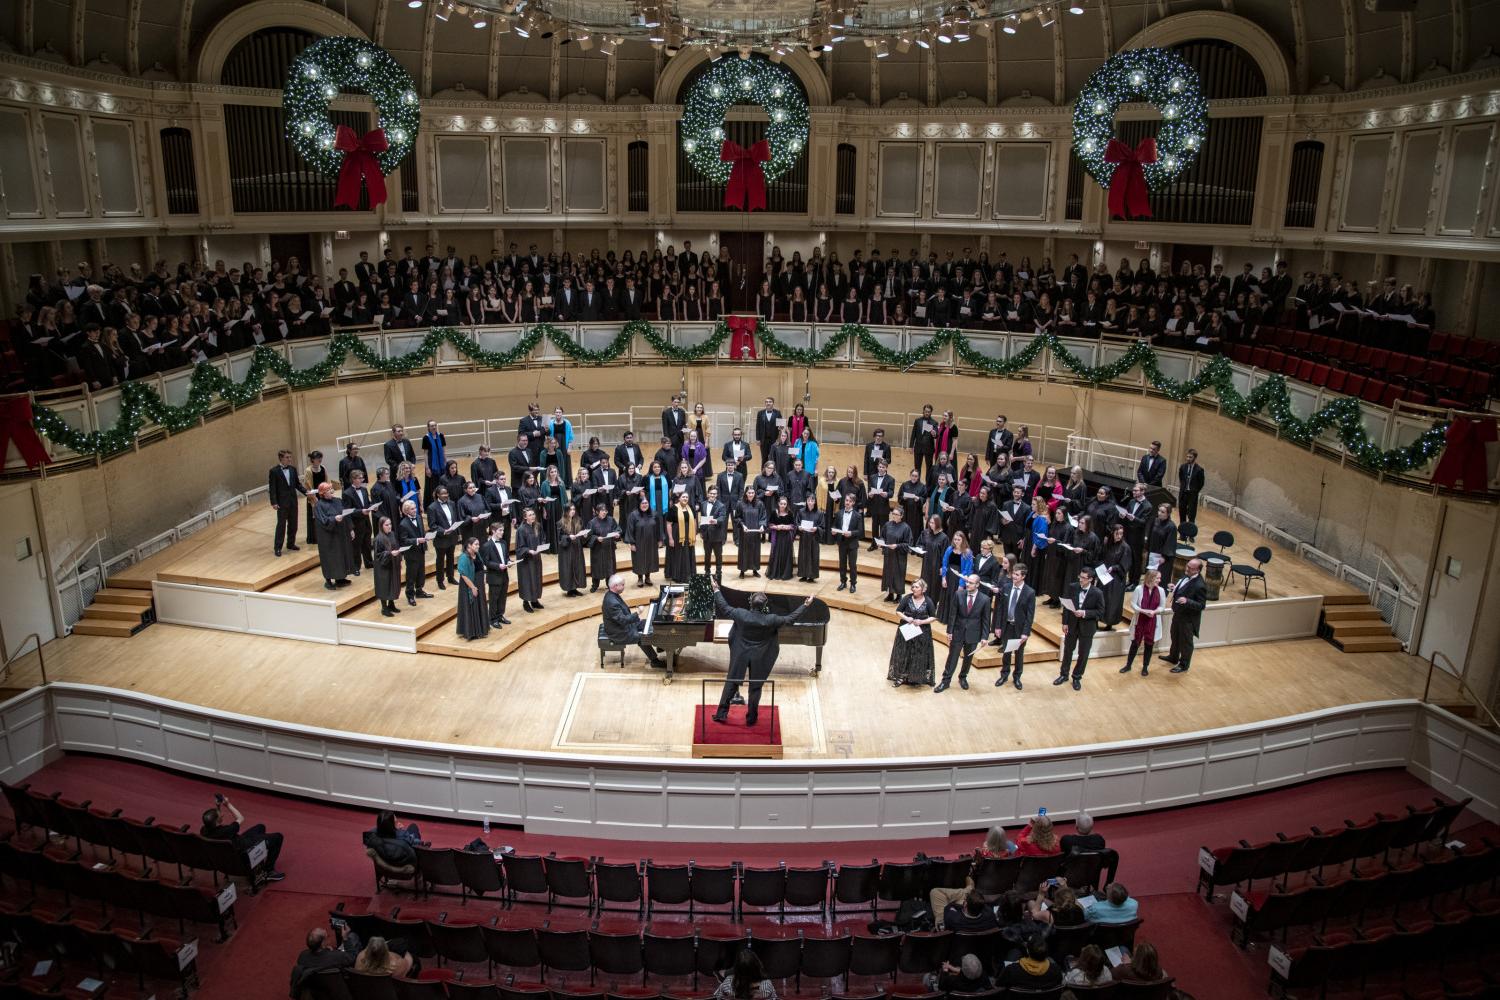 The <a href='http://swvcvil.whgaolian.com'>bv伟德ios下载</a> Choir performs in the Chicago Symphony Hall.